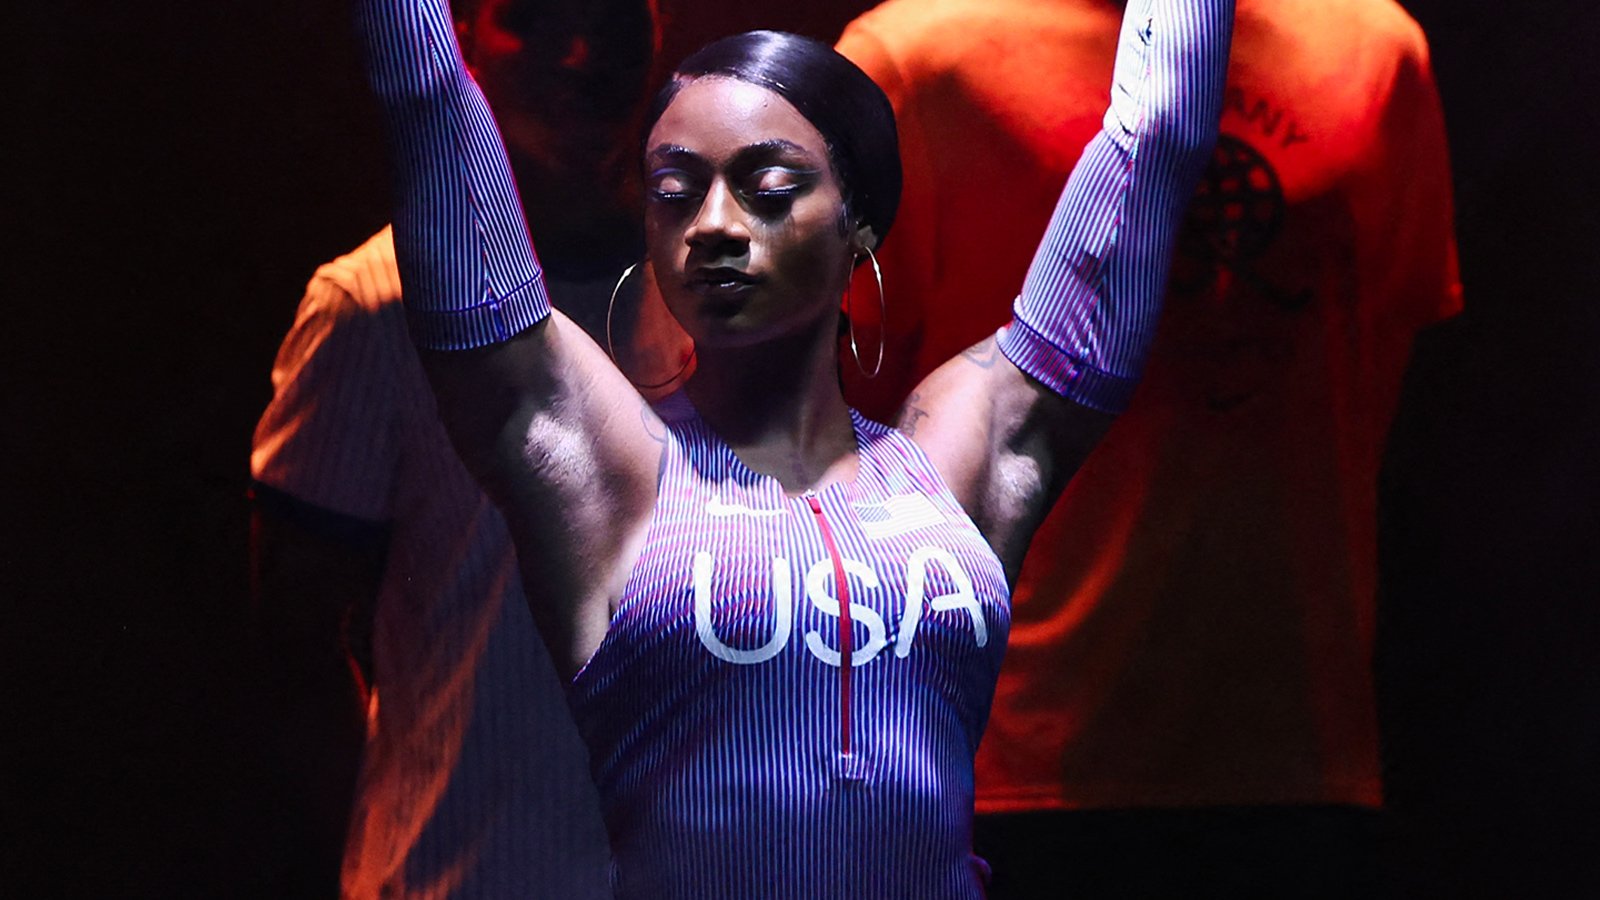 Backlash for Nike's women's Olympic outfits, Tiger Woods KOs a fan, and more - cover